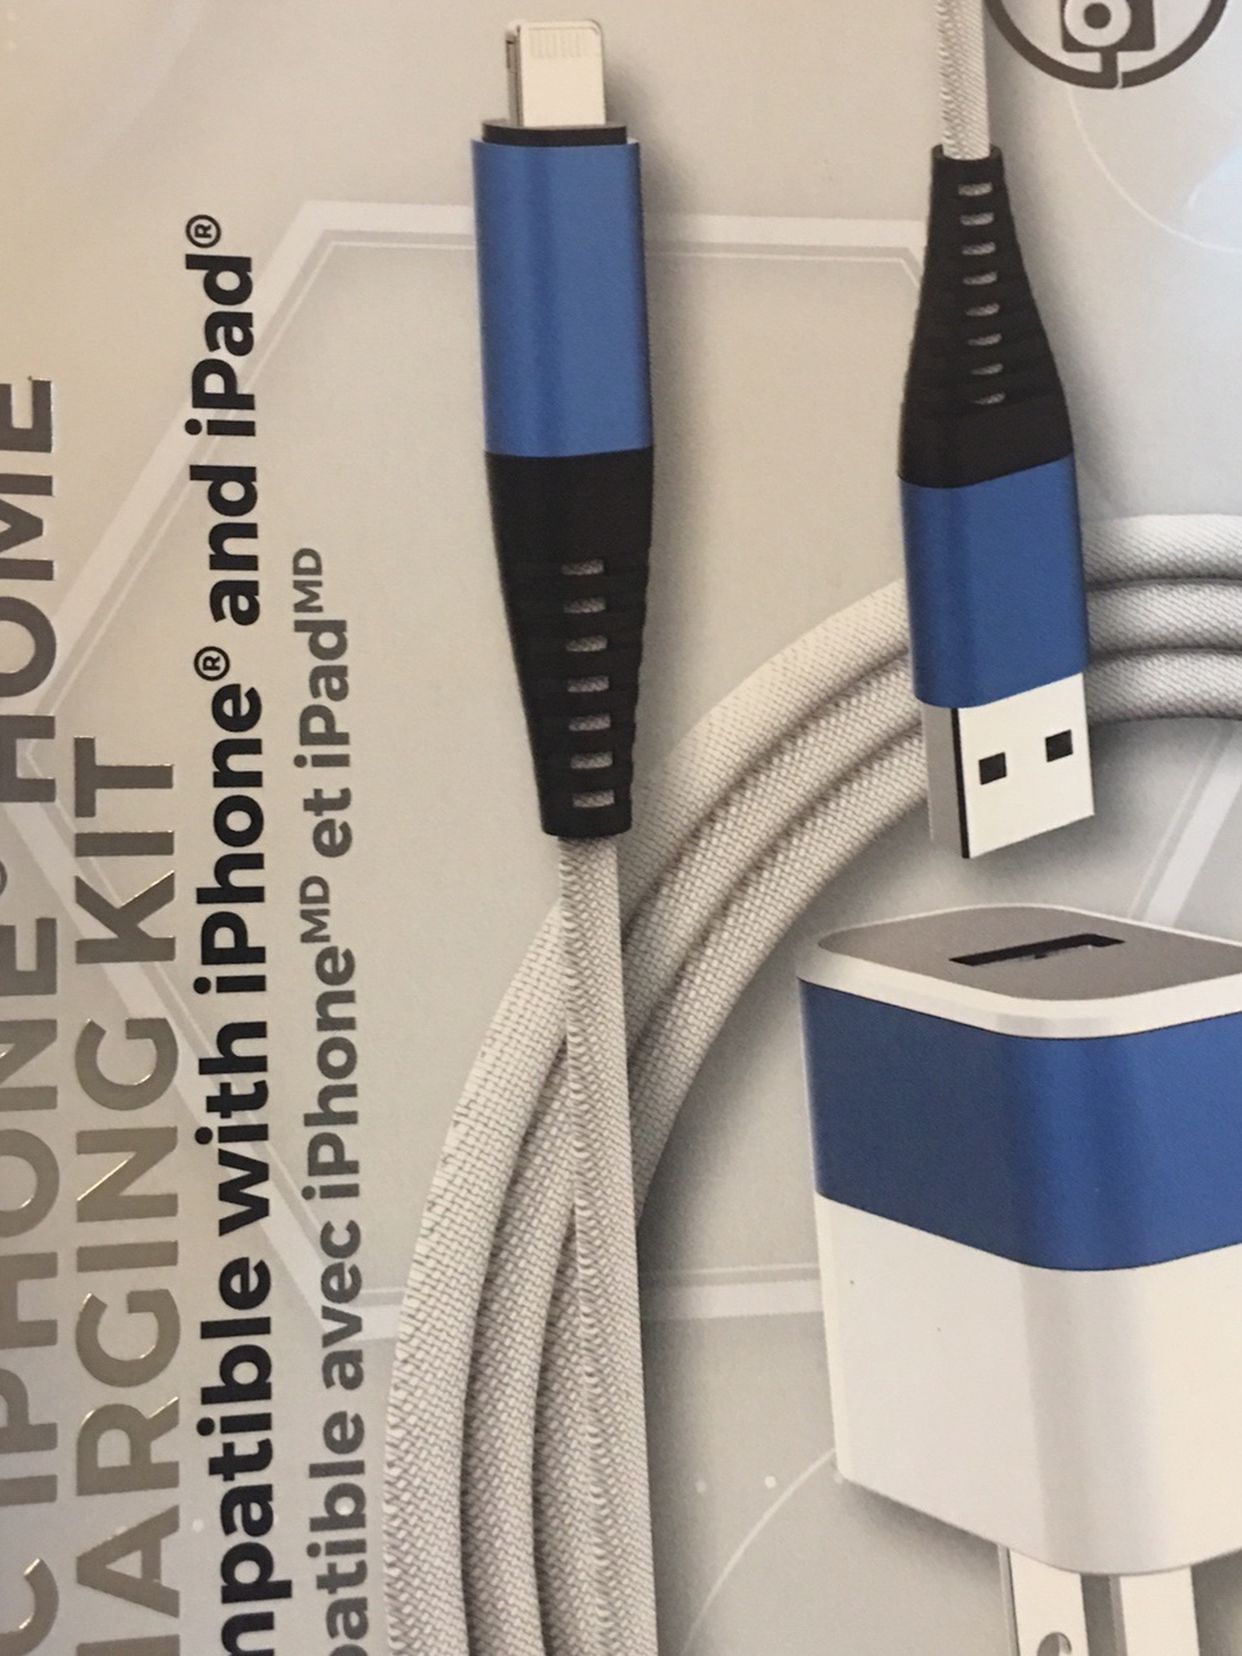 iPhone Cable Brand New In Box Perfect For iPhone 5 and Up